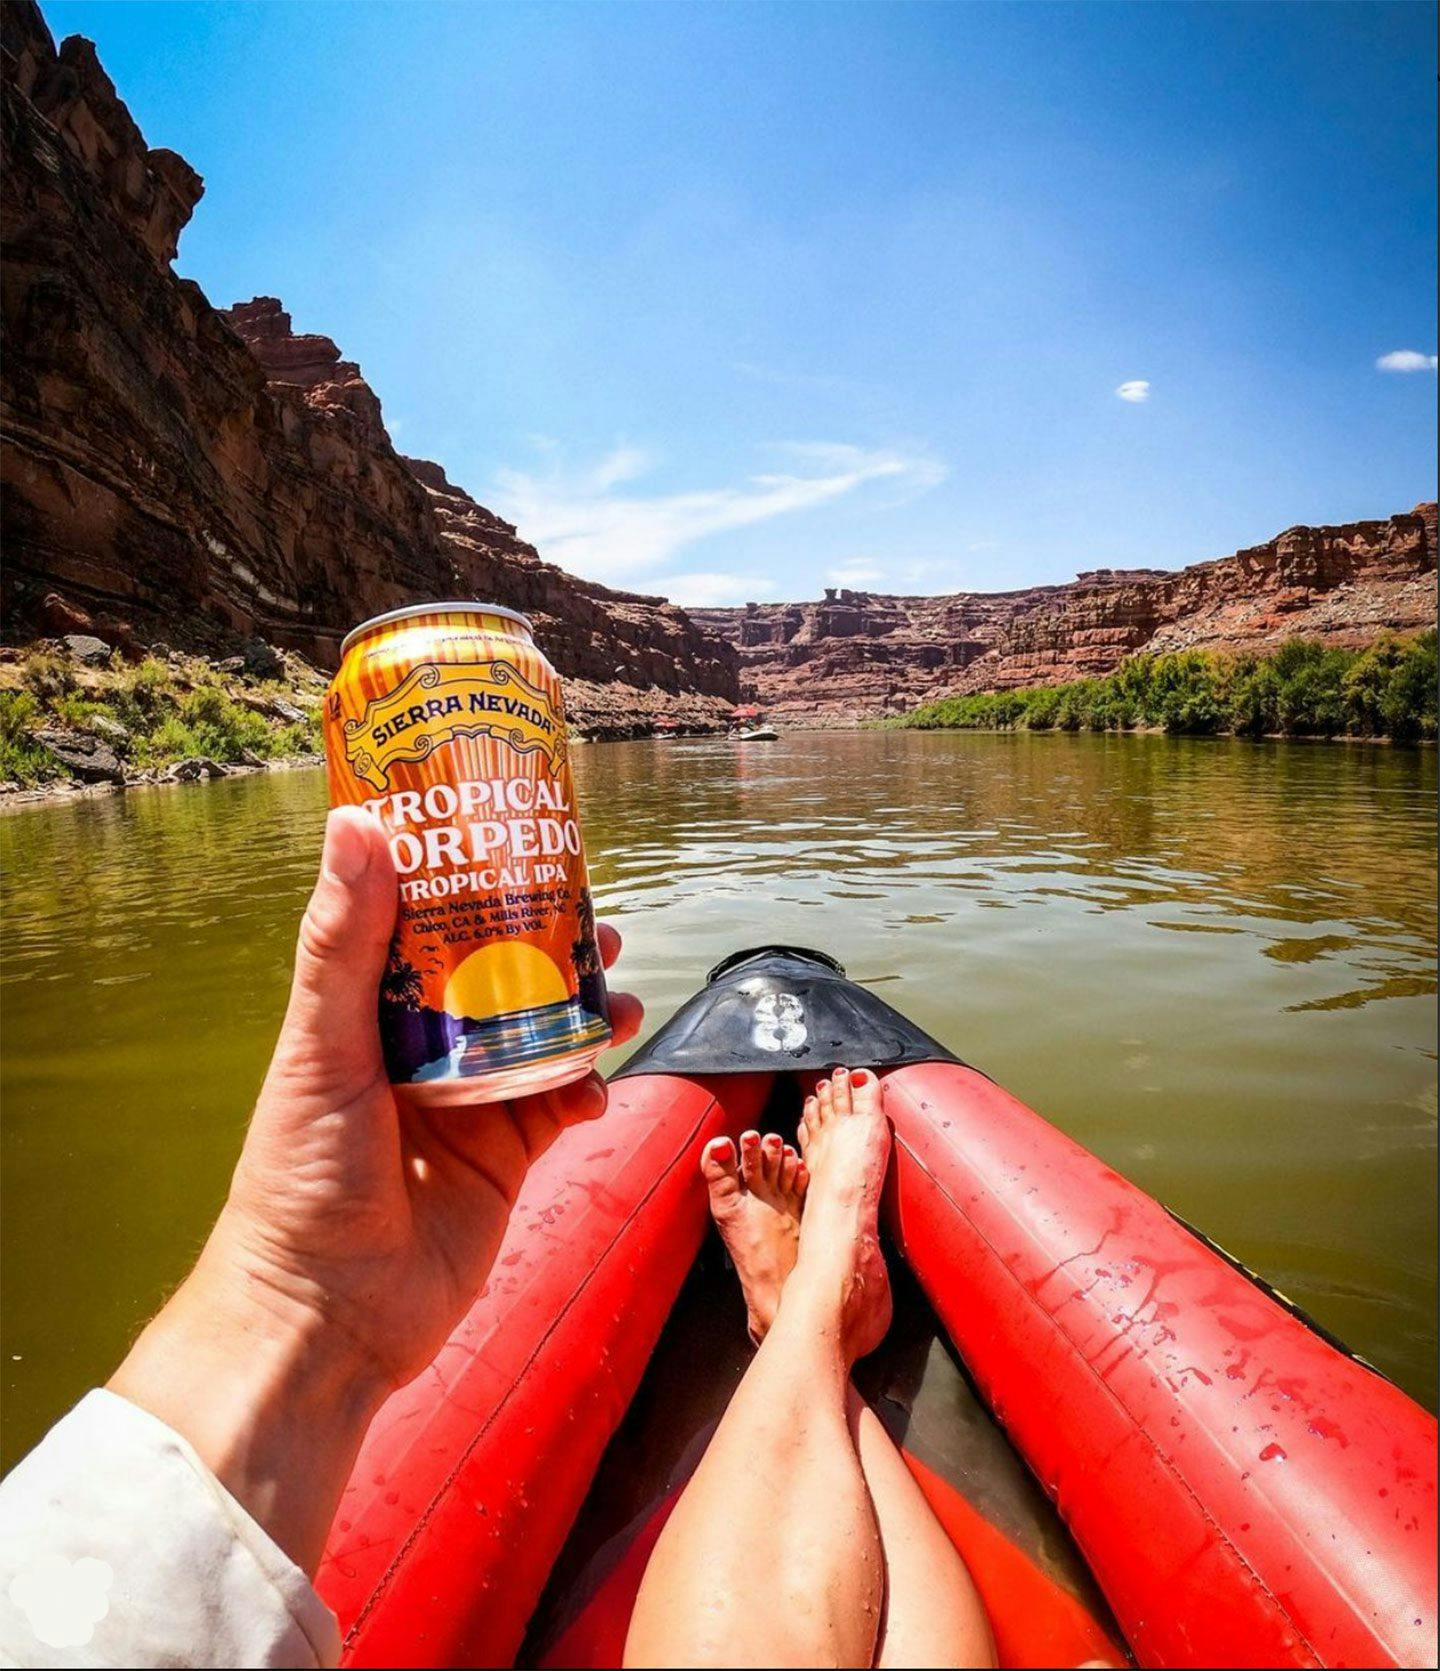 Person holding Tropical Torpedo IPA can on river